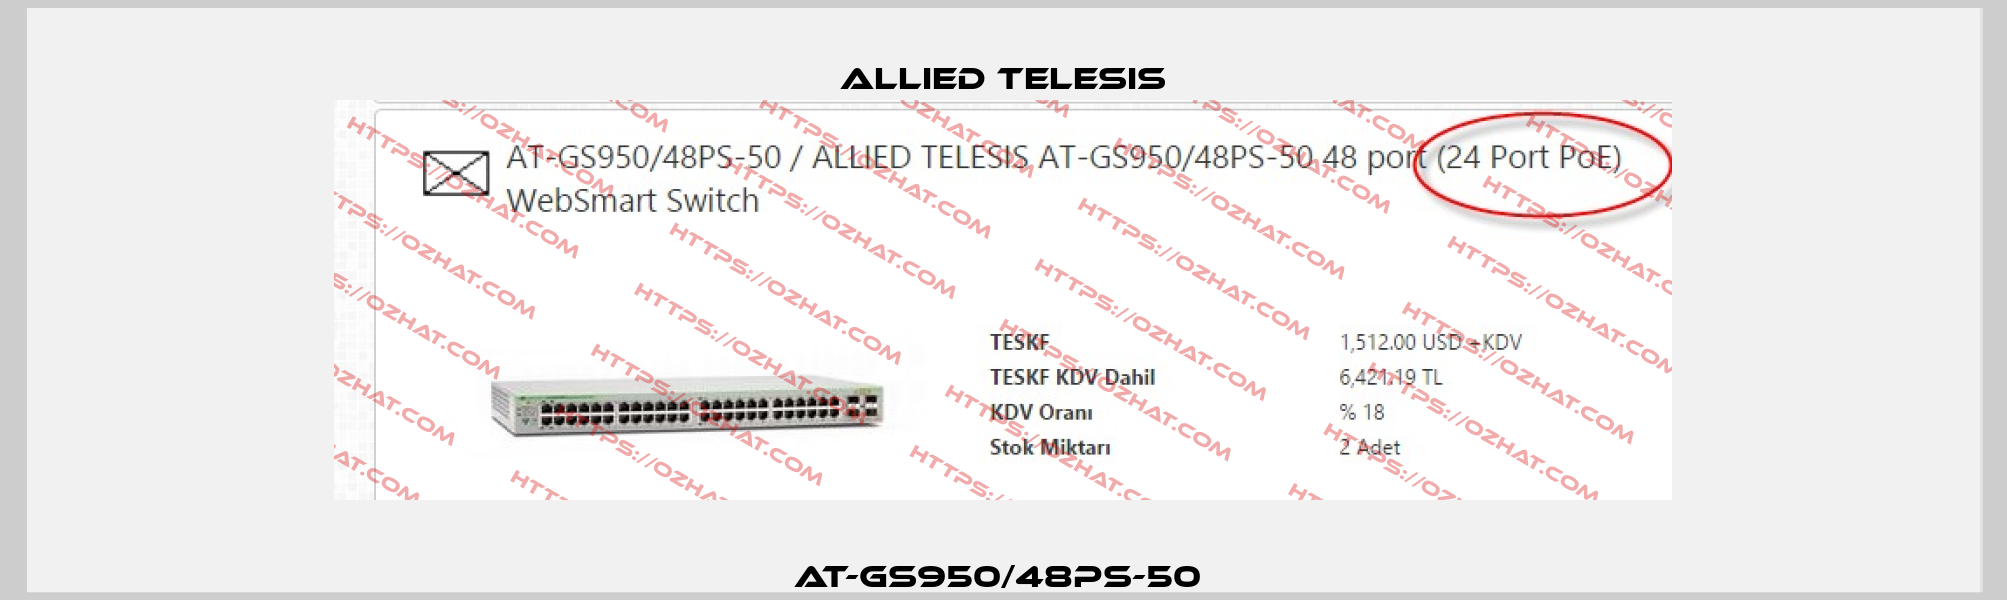 AT-GS950/48PS-50  Allied Telesis